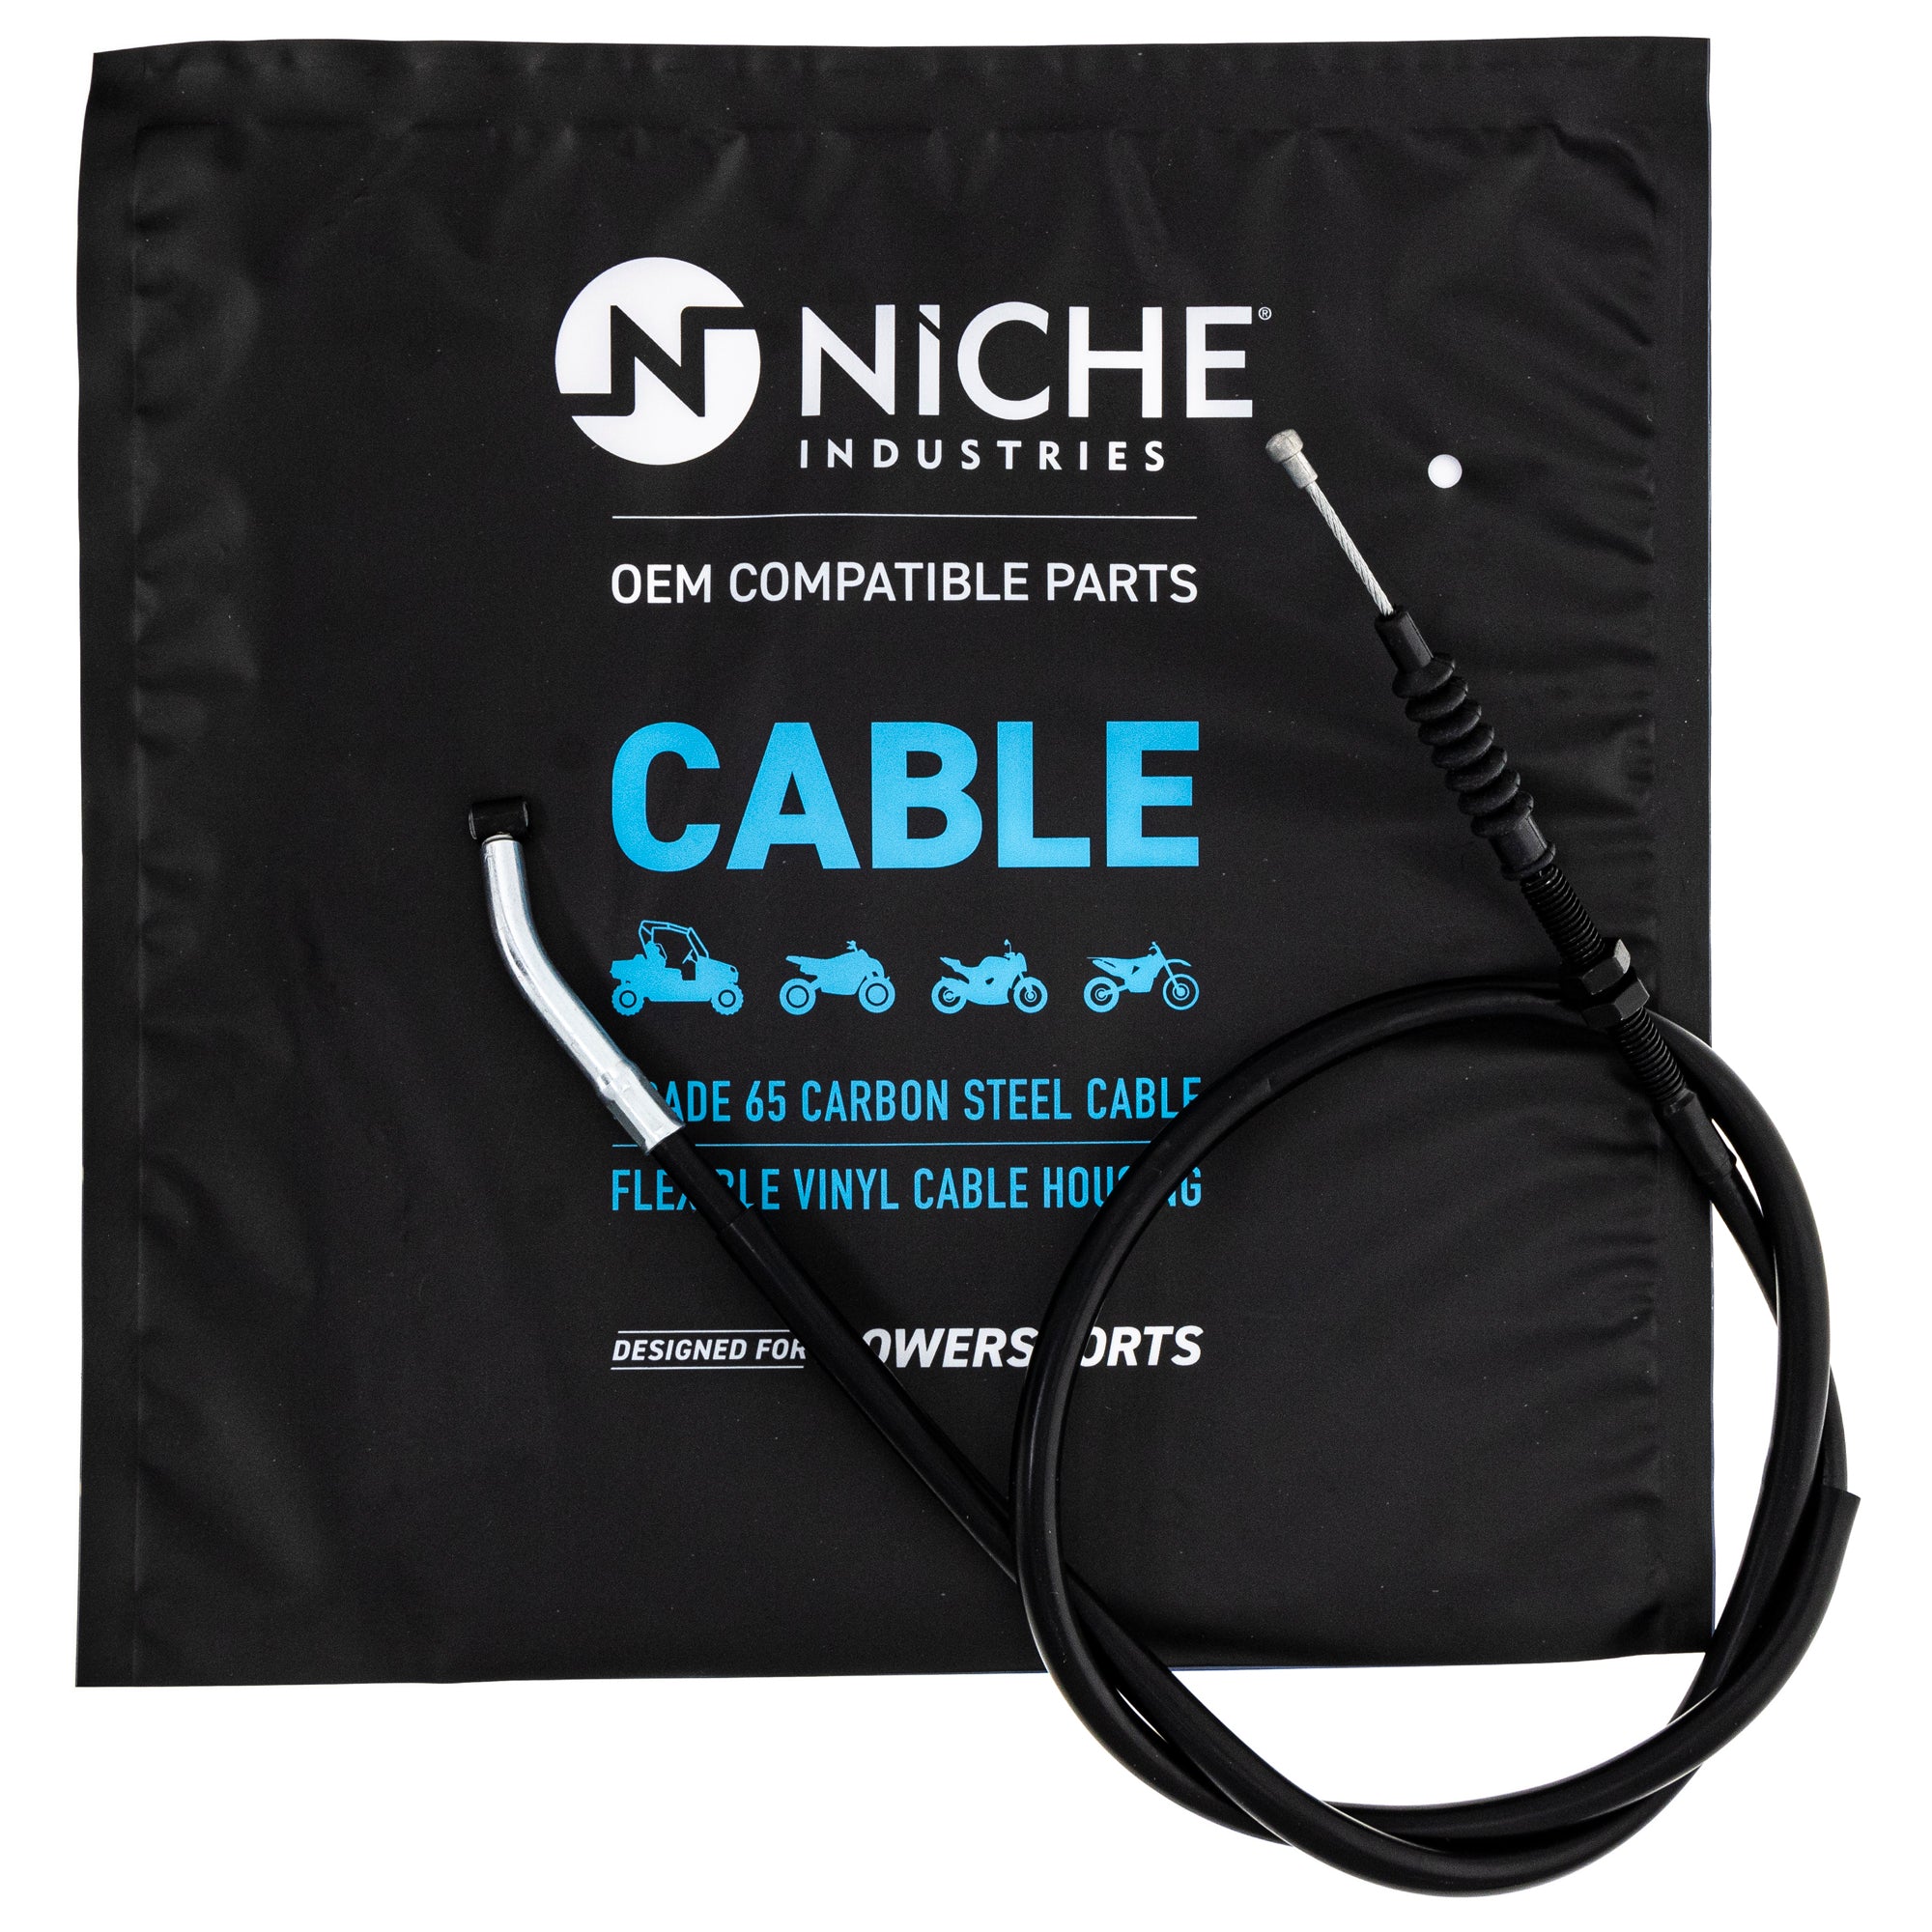 NICHE 519-CCB2459L Clutch Cable for zOTHER Ninja